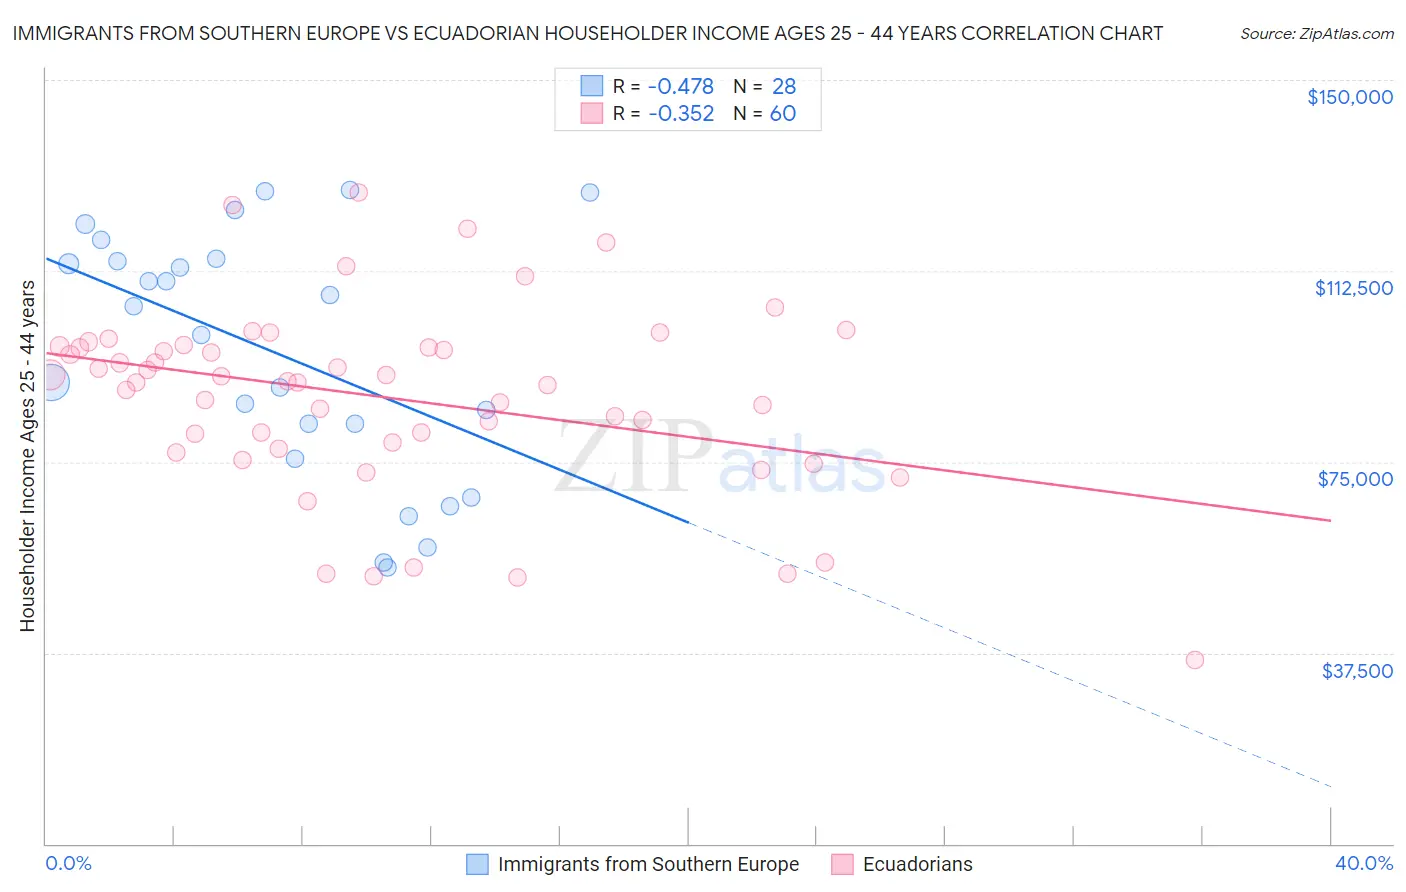 Immigrants from Southern Europe vs Ecuadorian Householder Income Ages 25 - 44 years